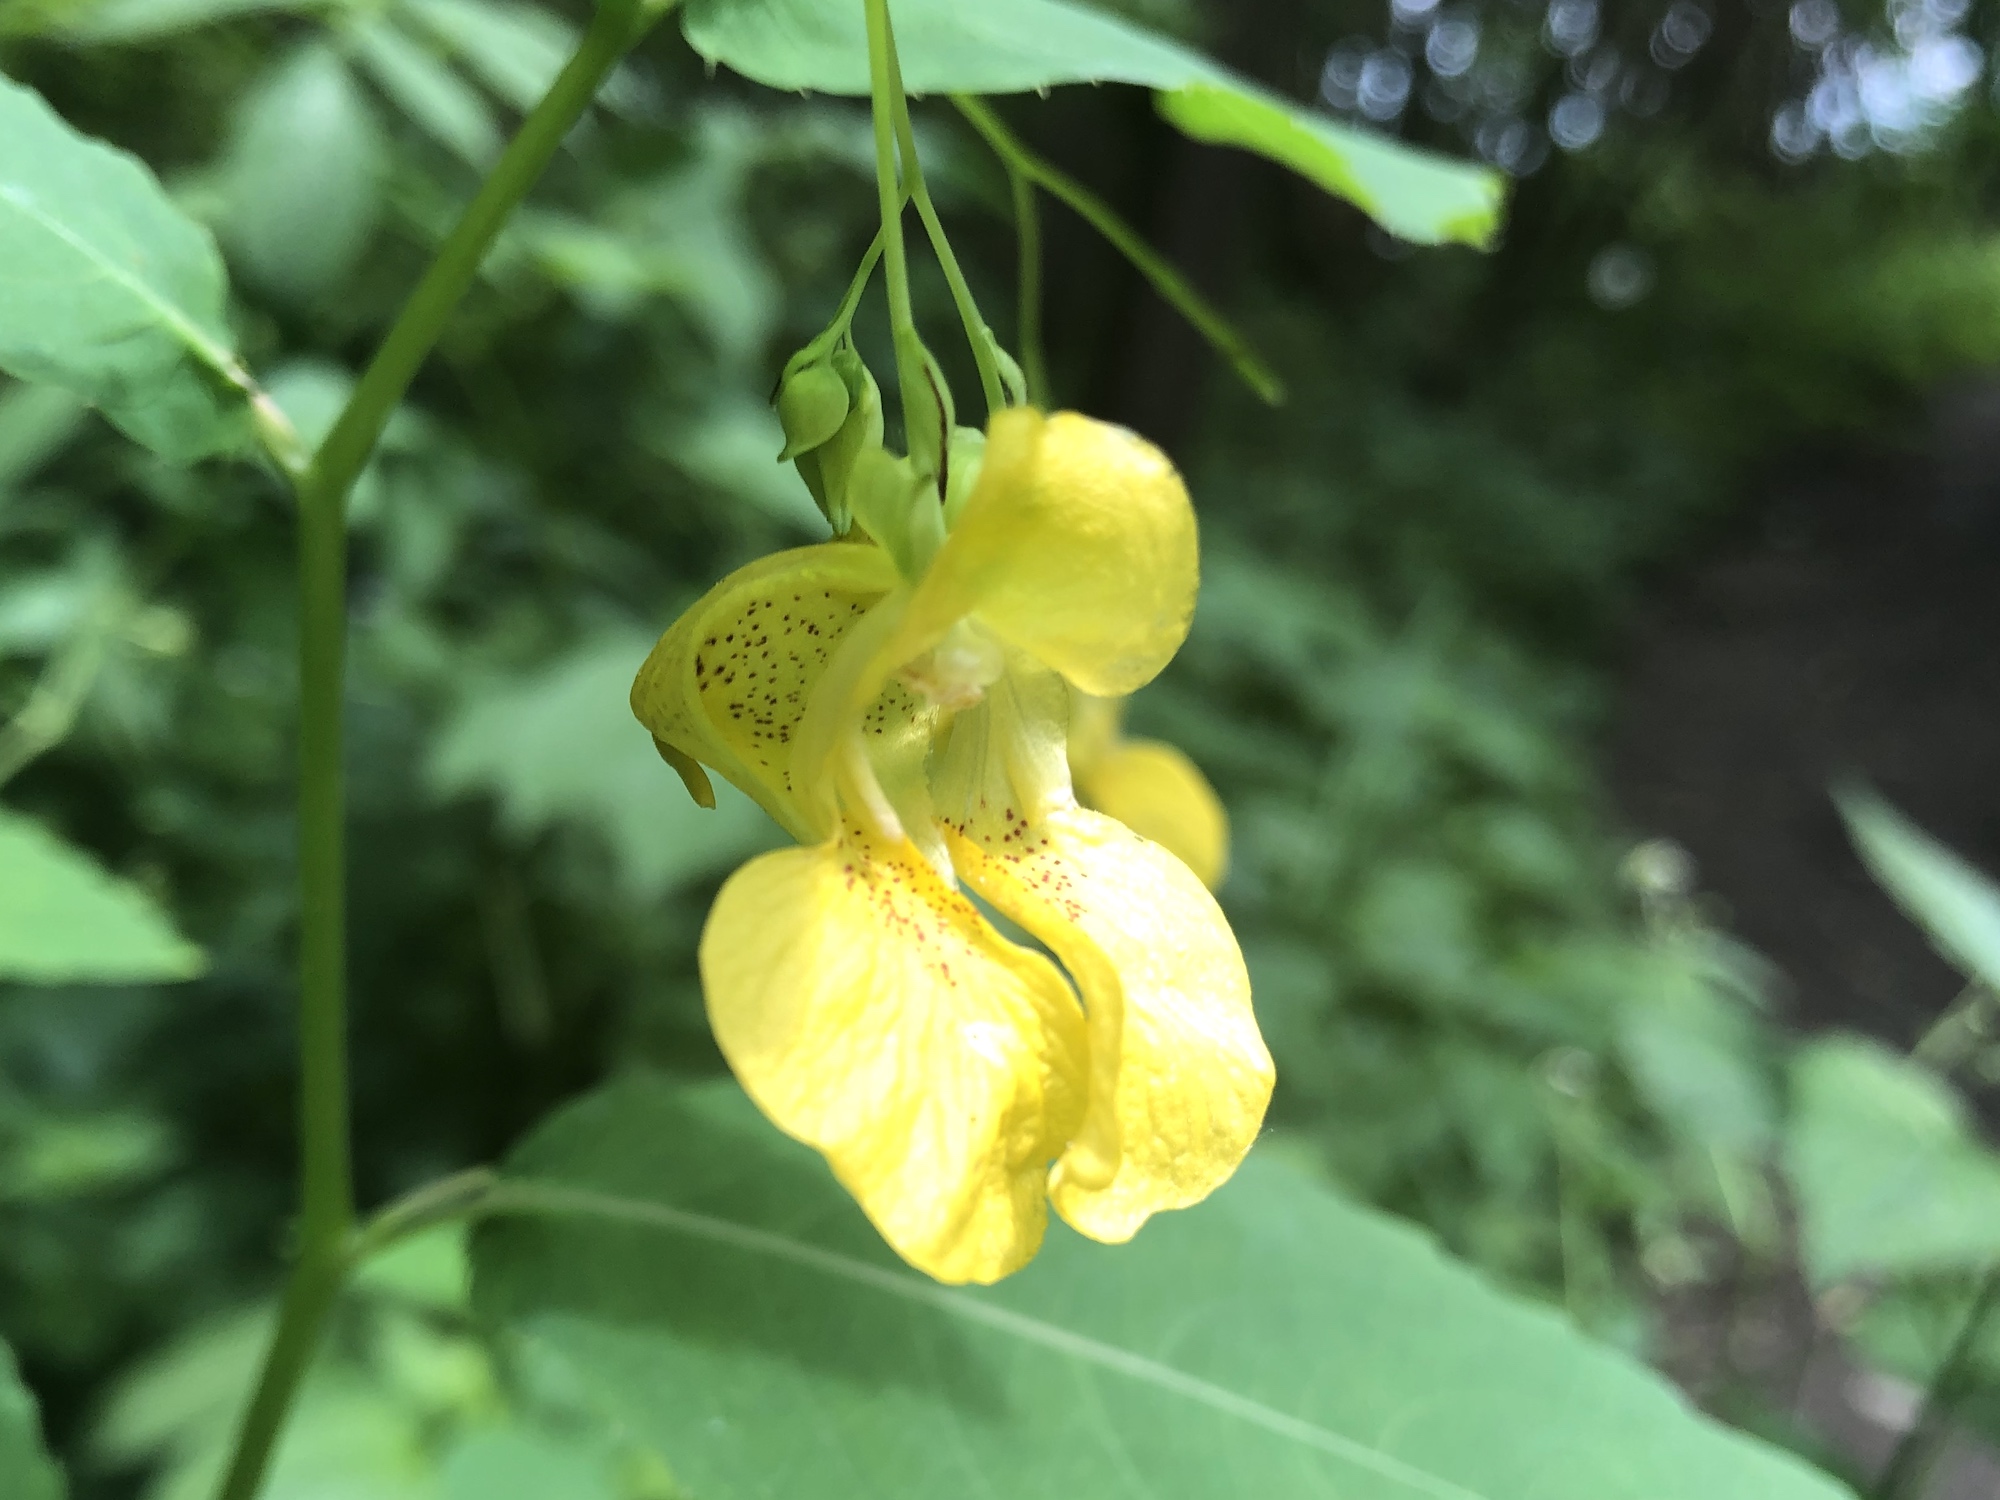 Yellow Jewelweed in woods along Pickford Street stormwater outflow (ends at Cattails) on June 26, 2019.